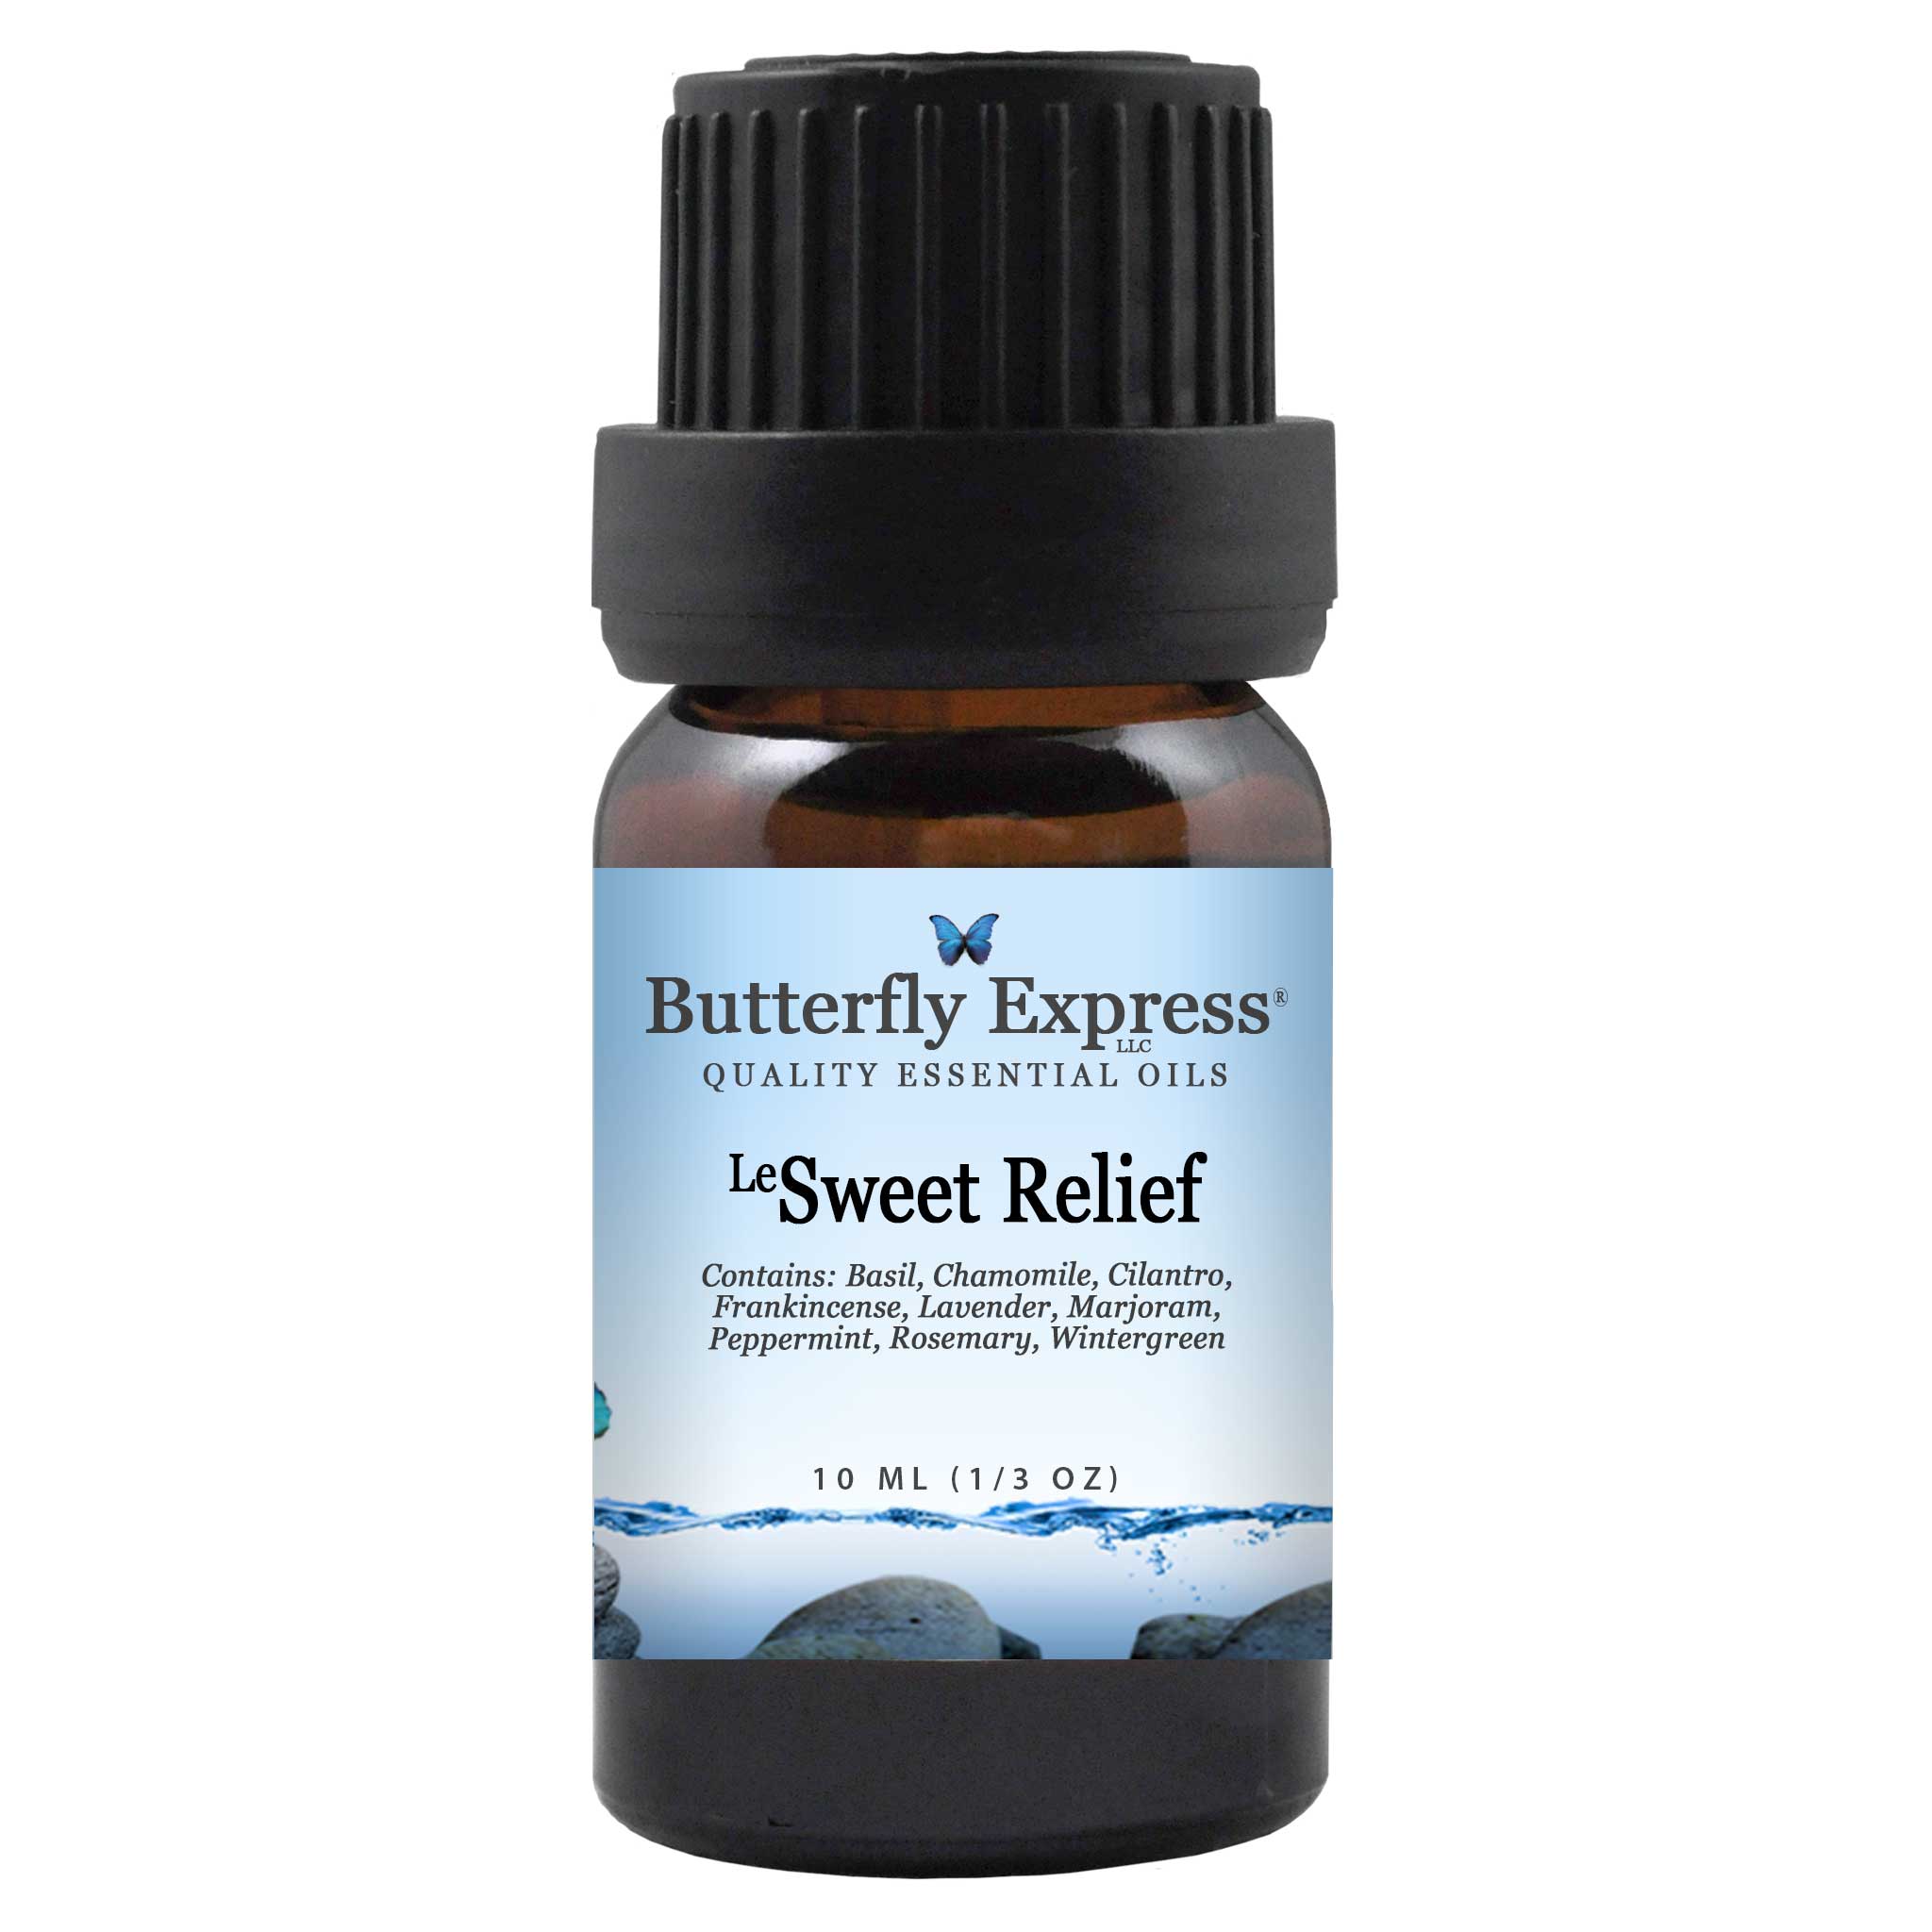 Sweet Relief Essential Oil